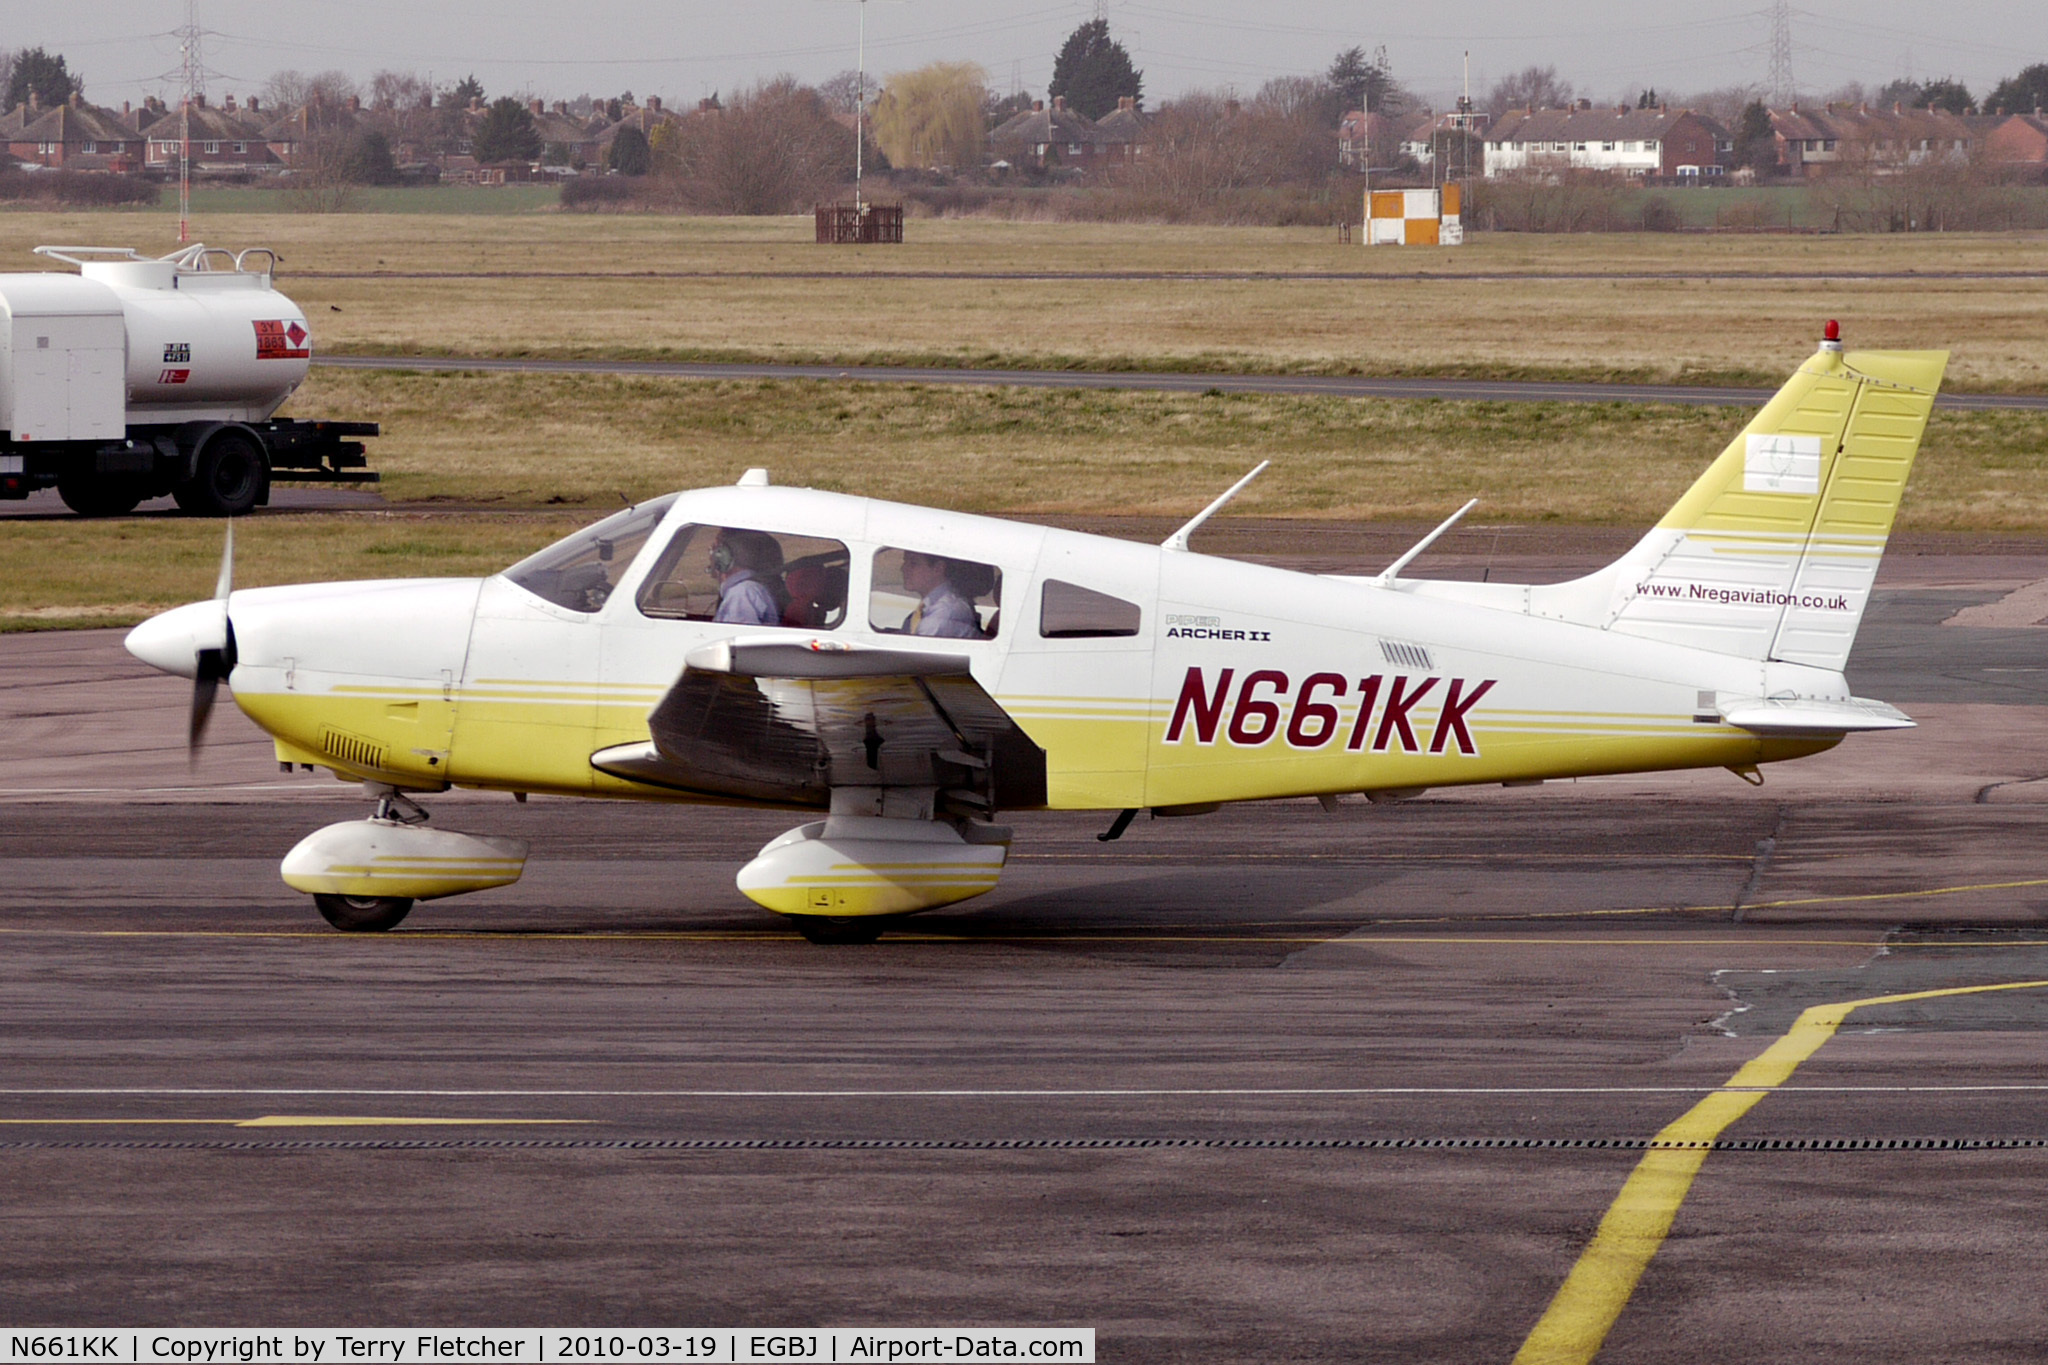 N661KK, 1987 Piper PA-28-181 Archer II C/N 2890028, 1987 Piper PA-28-181 at Gloucestershire (Staverton) Airport